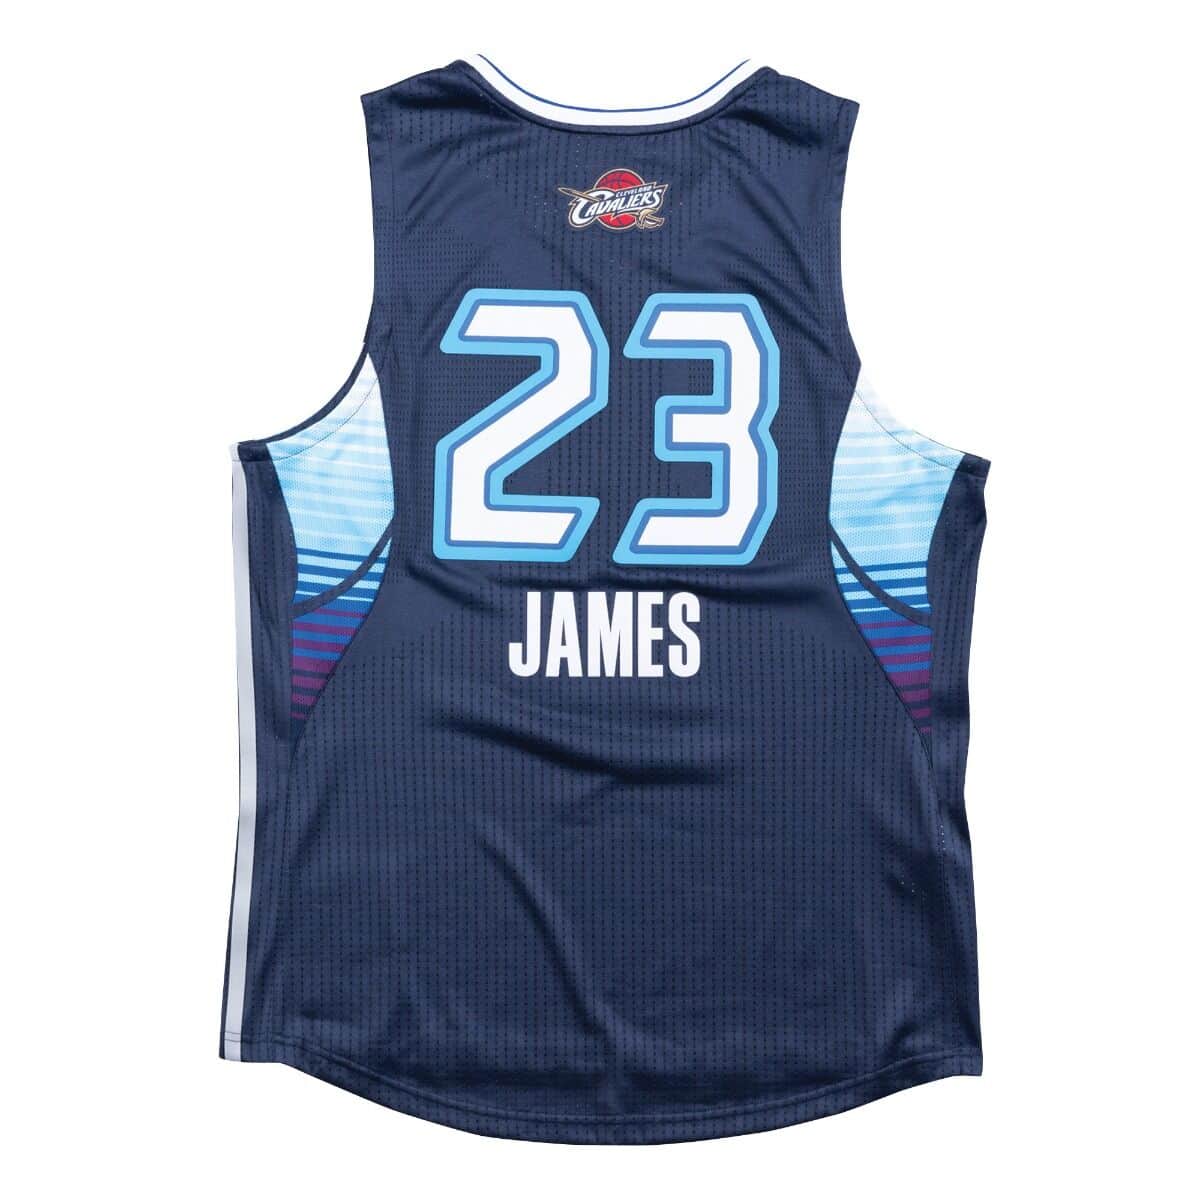 NBA Authentic Jersey All-Star East 2009 Lebron James